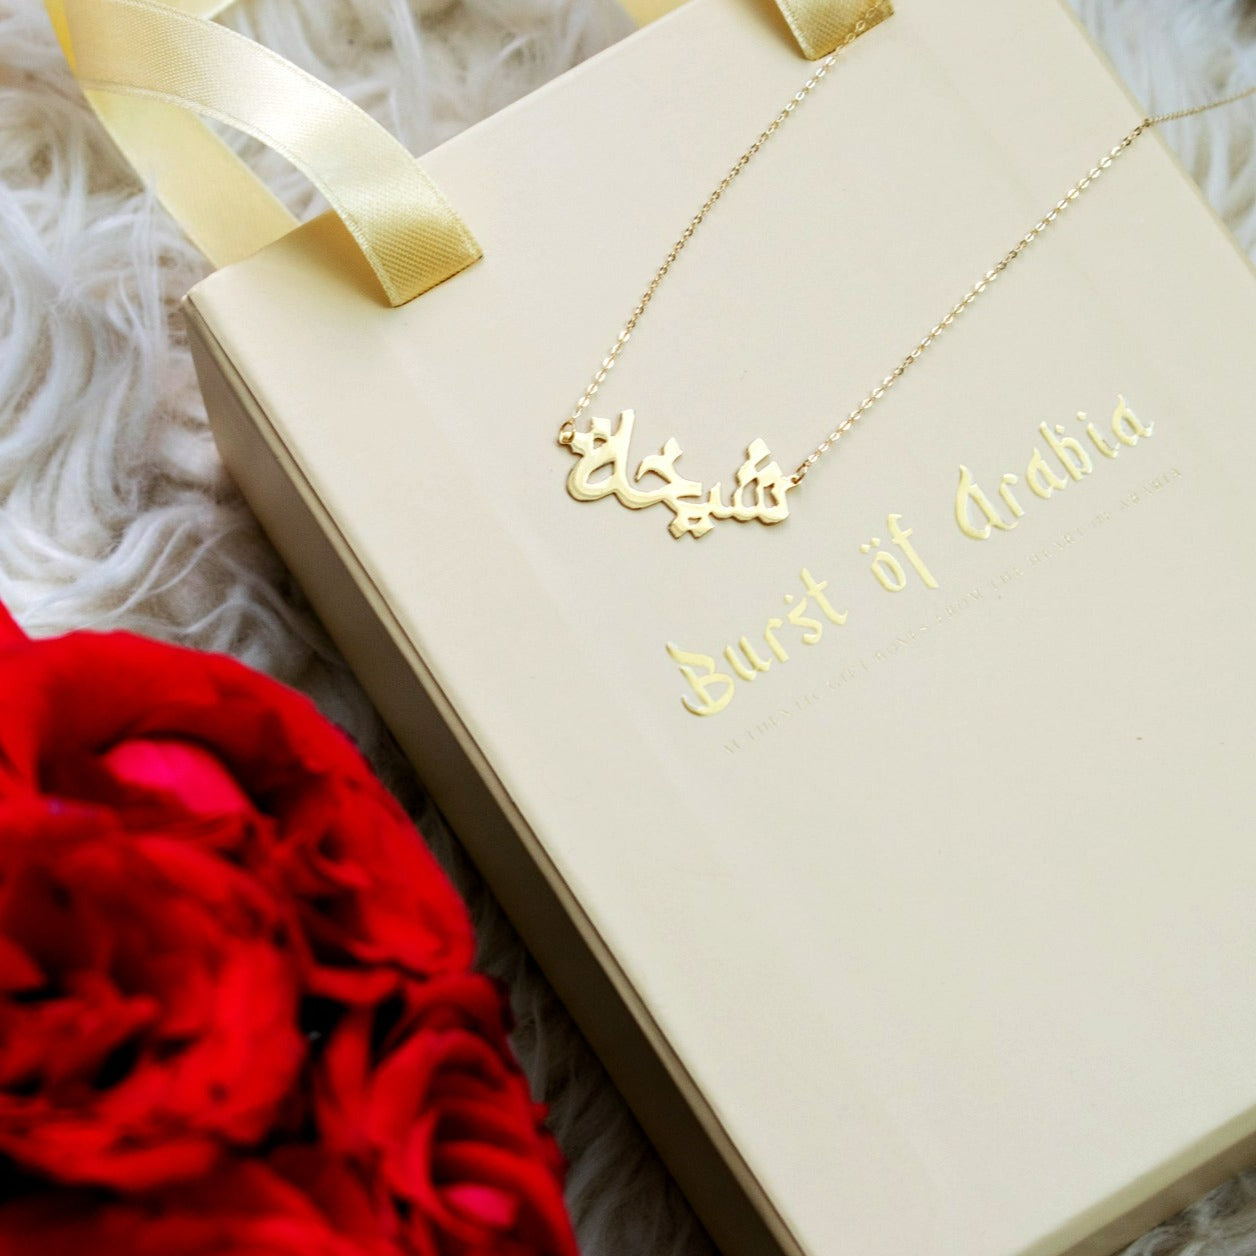 18 carat gold arabic name necklace Customized gifts in Dubai, Abu Dhabi, UAE Order personalized jewelry for women Luxury gift for wife birthday gift for girlfriend anniversary gifts for her.